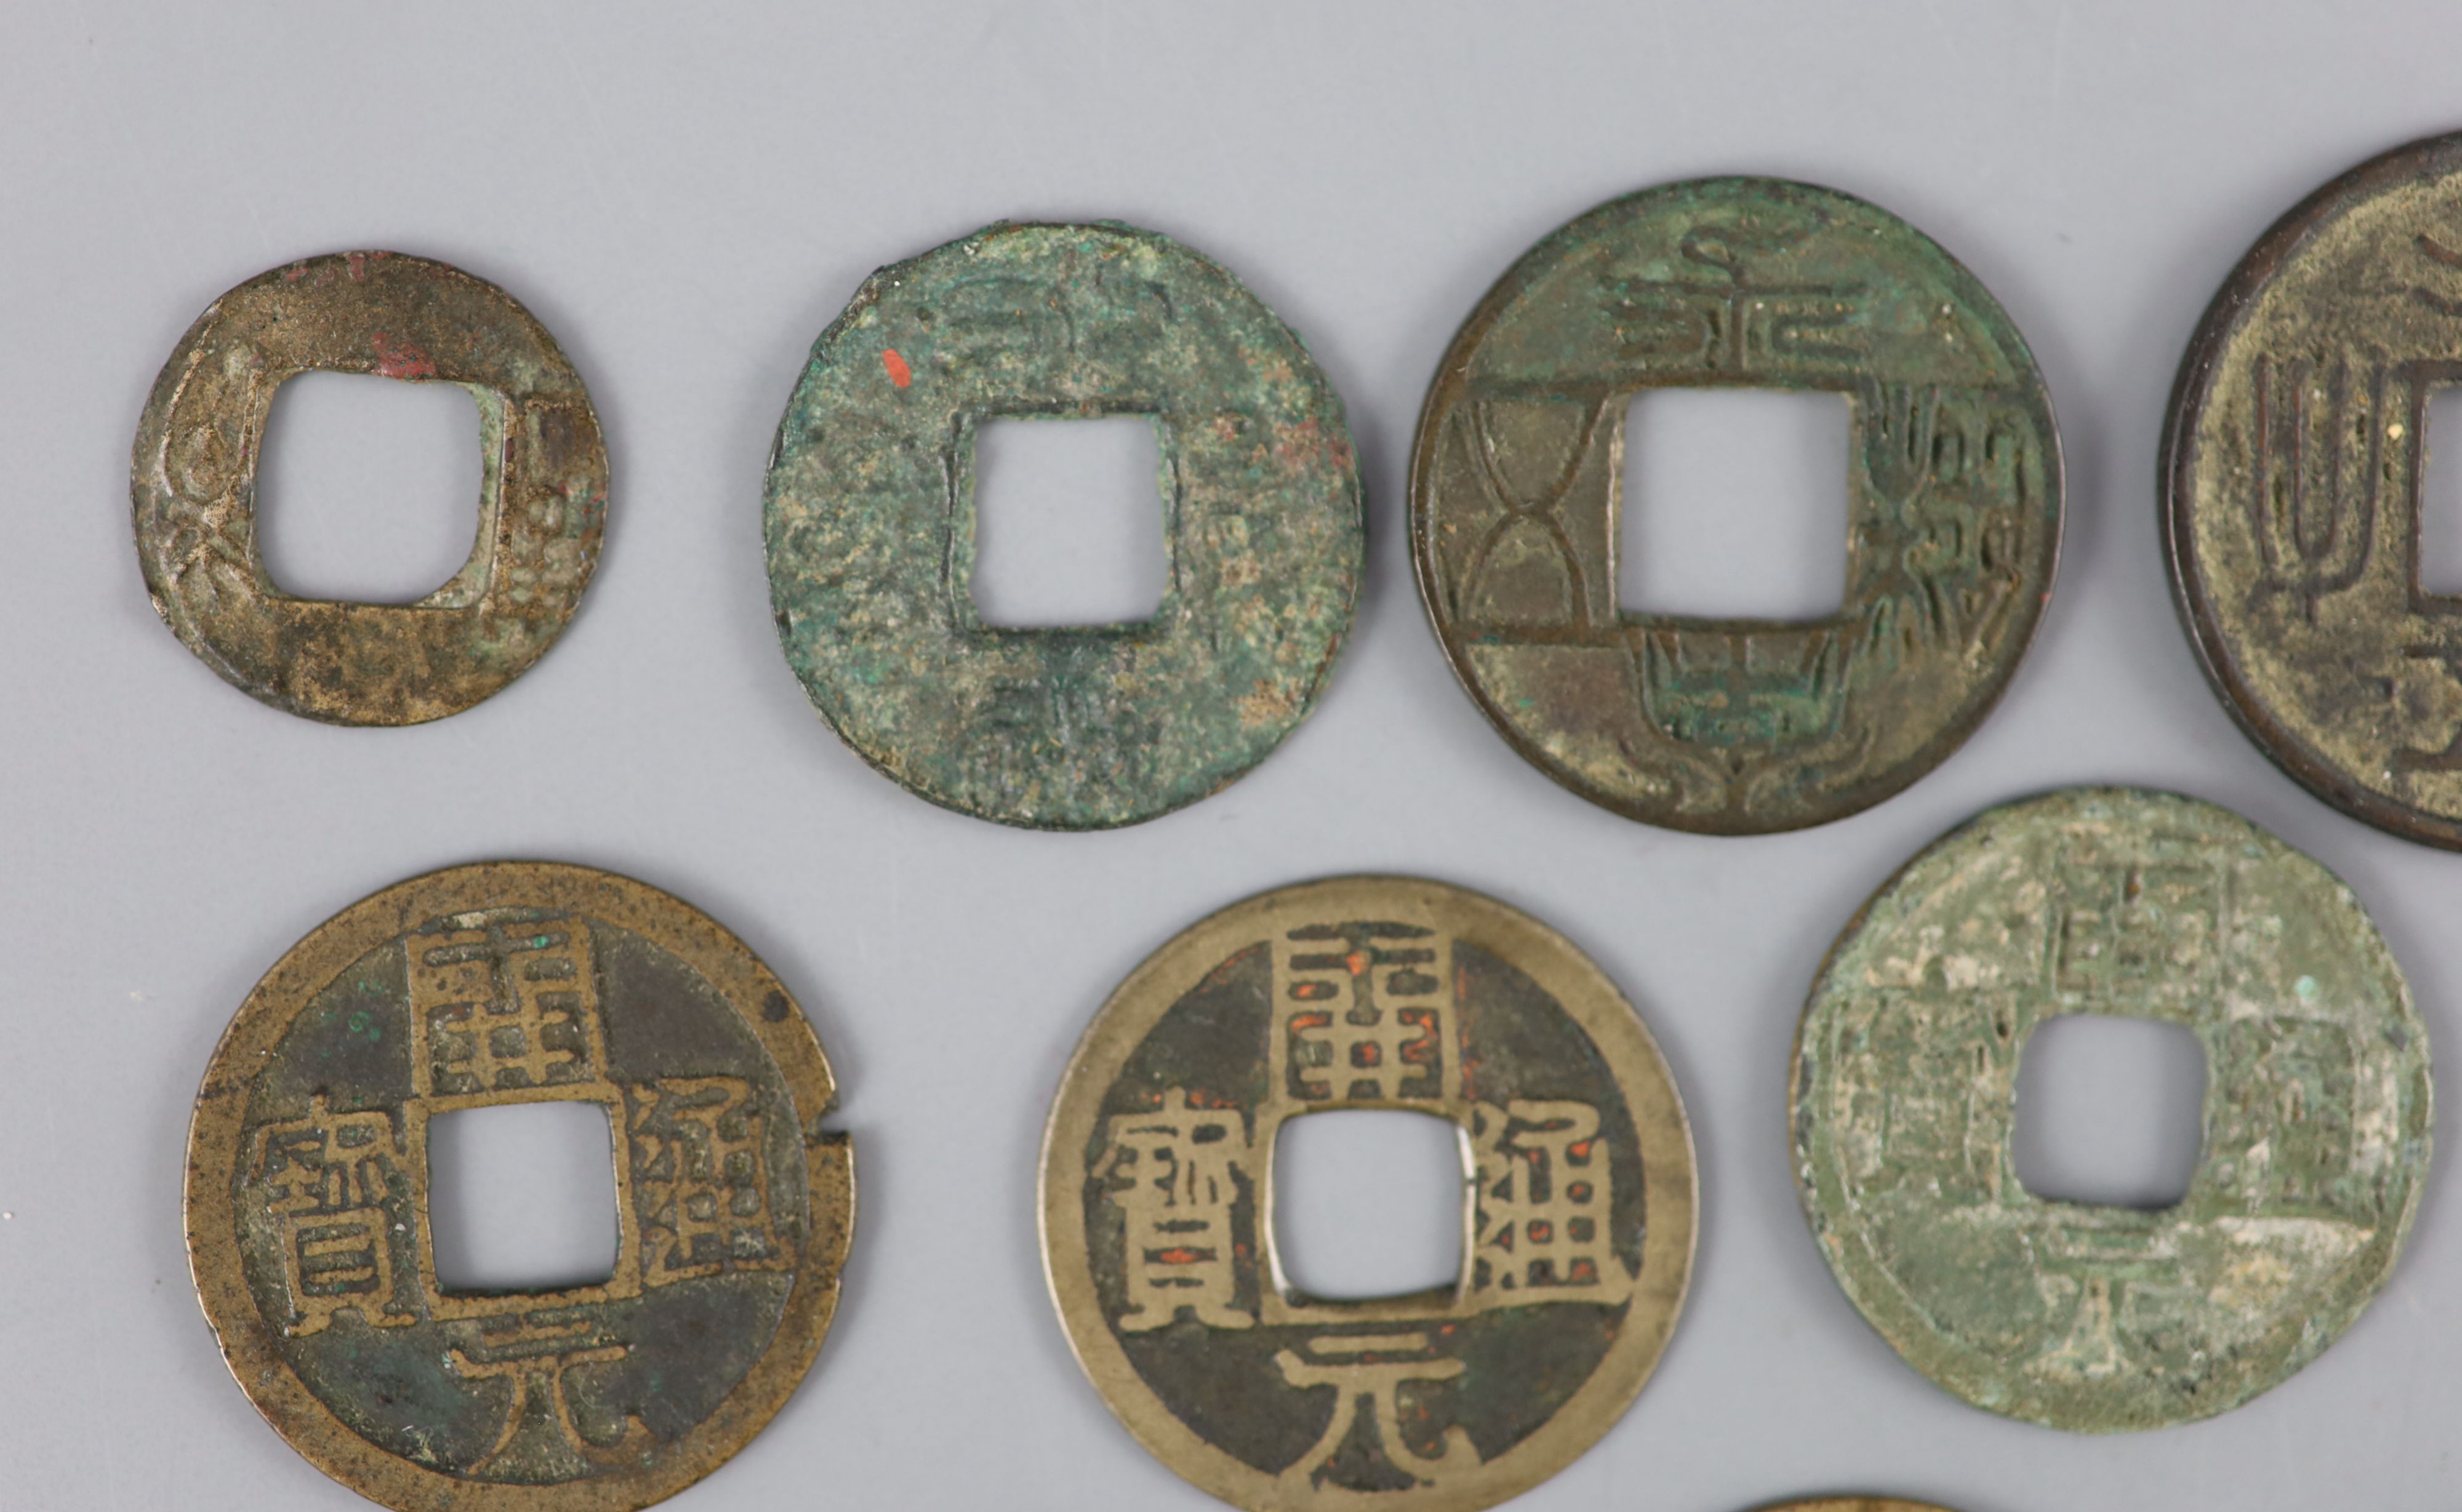 China, 17 Ancient bronze round coins, Southern Dynasties (420 AD) to Tang dynasty (907 AD) 18 - Image 2 of 3